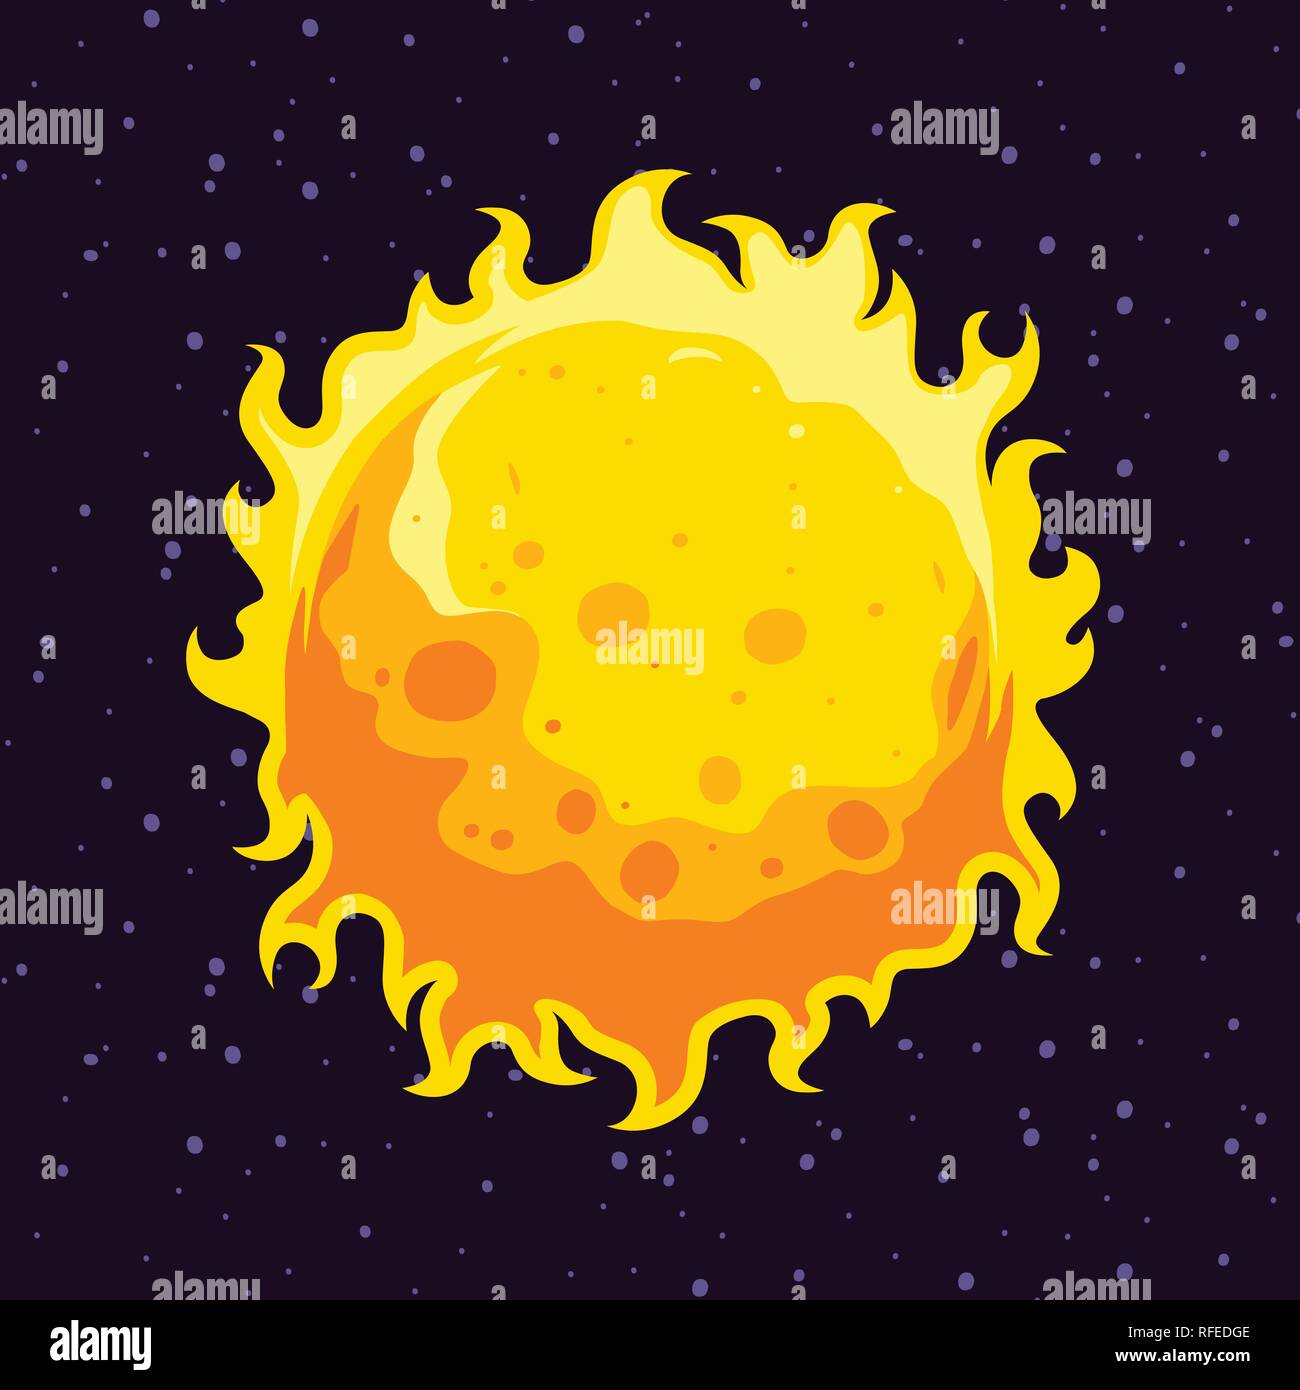 The sun illustration in cartoon style / flat design. Detailed shadow and highlights. Stock Vector